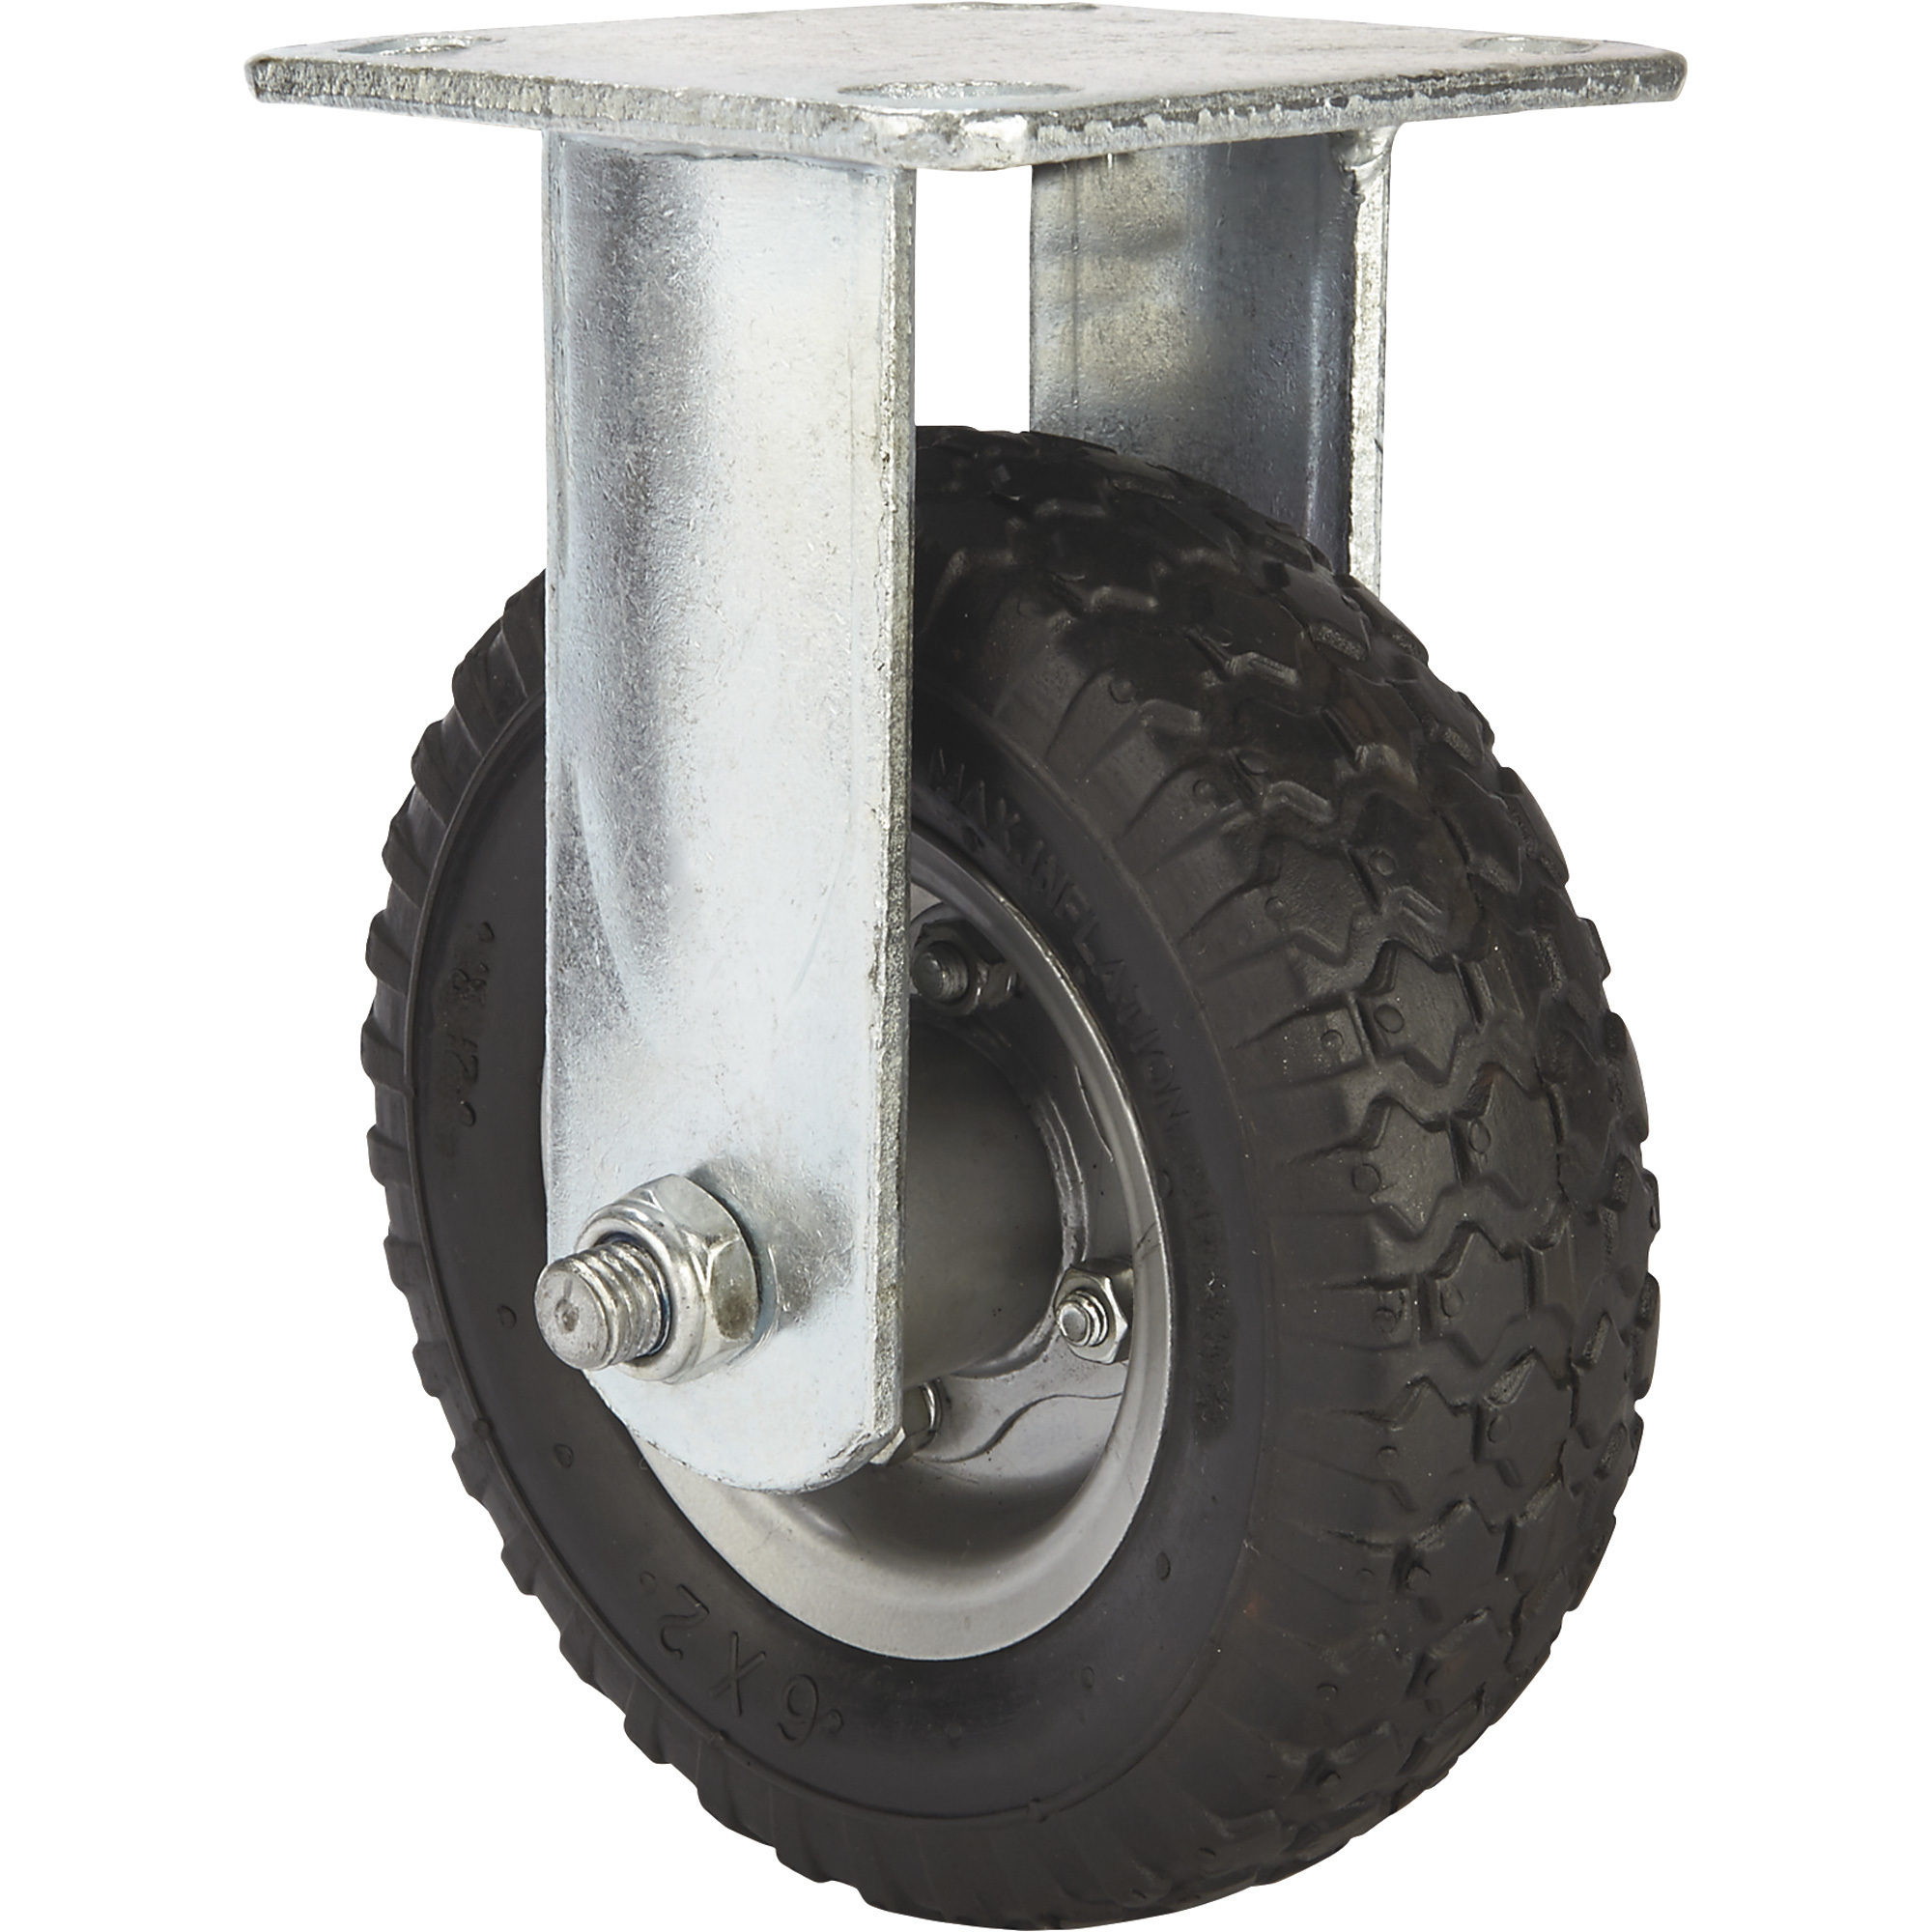 Strongway 6Inch Rigid Flat-Free Rubber Foam-Filled Caster, 200-Lb. Capacity, Knobby Tread